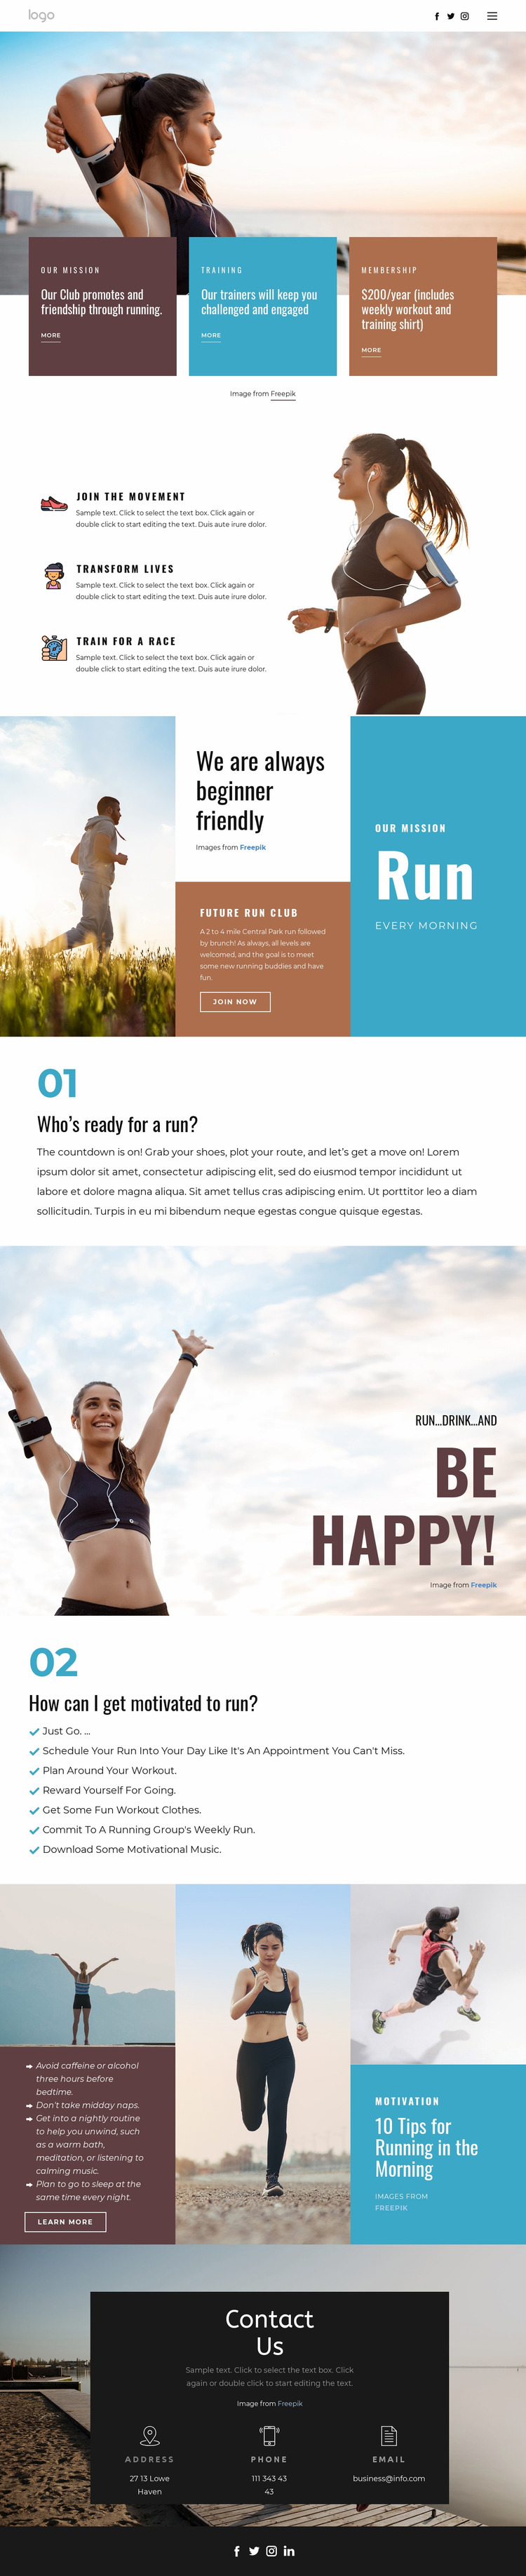 Running club for sports Website Mockup